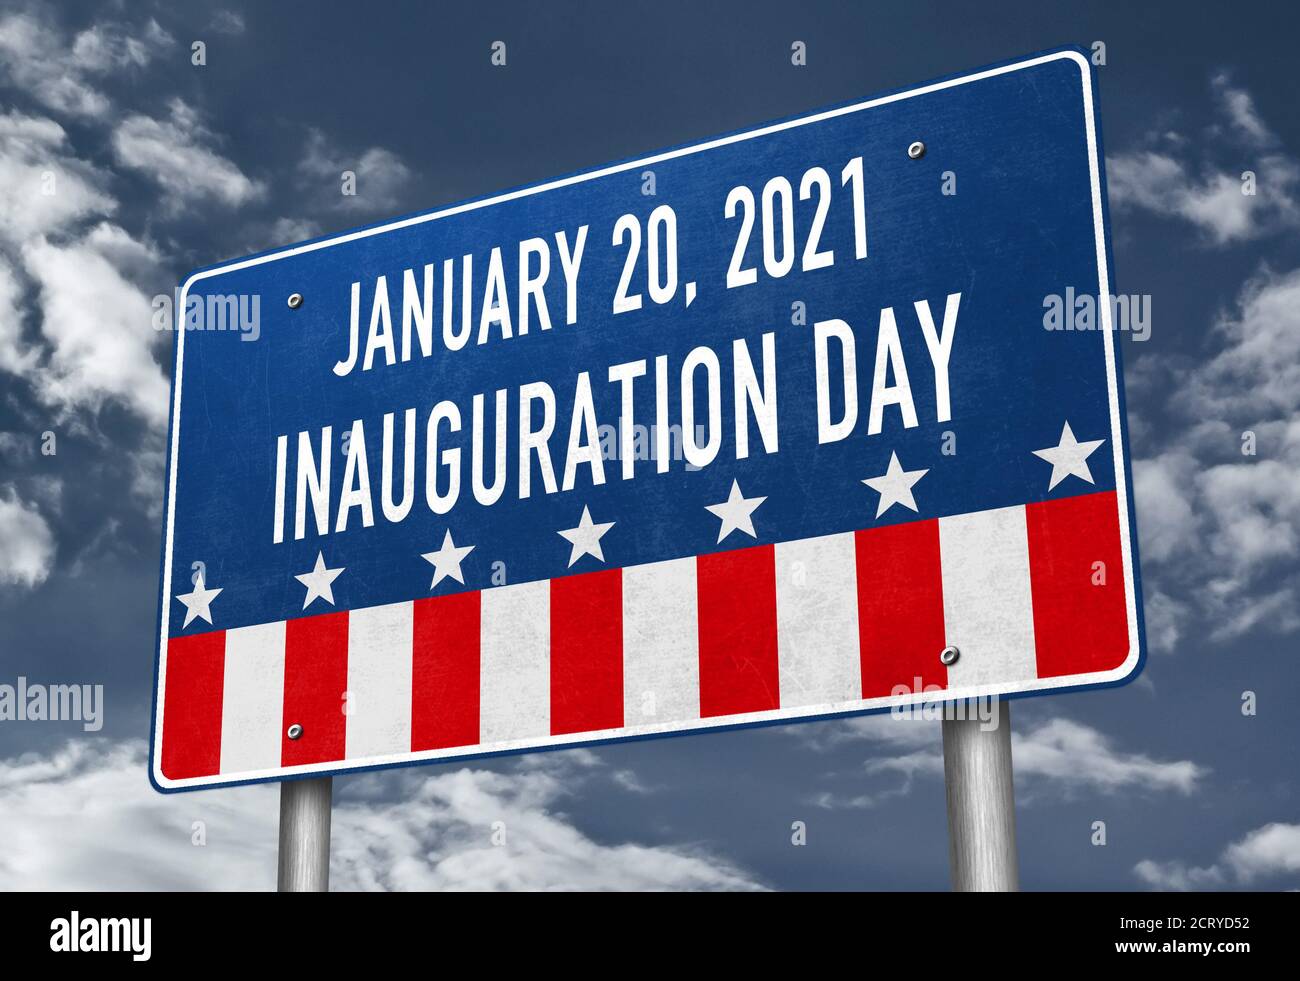 Inauguration Day in 2021 for the elected President Stock Photo